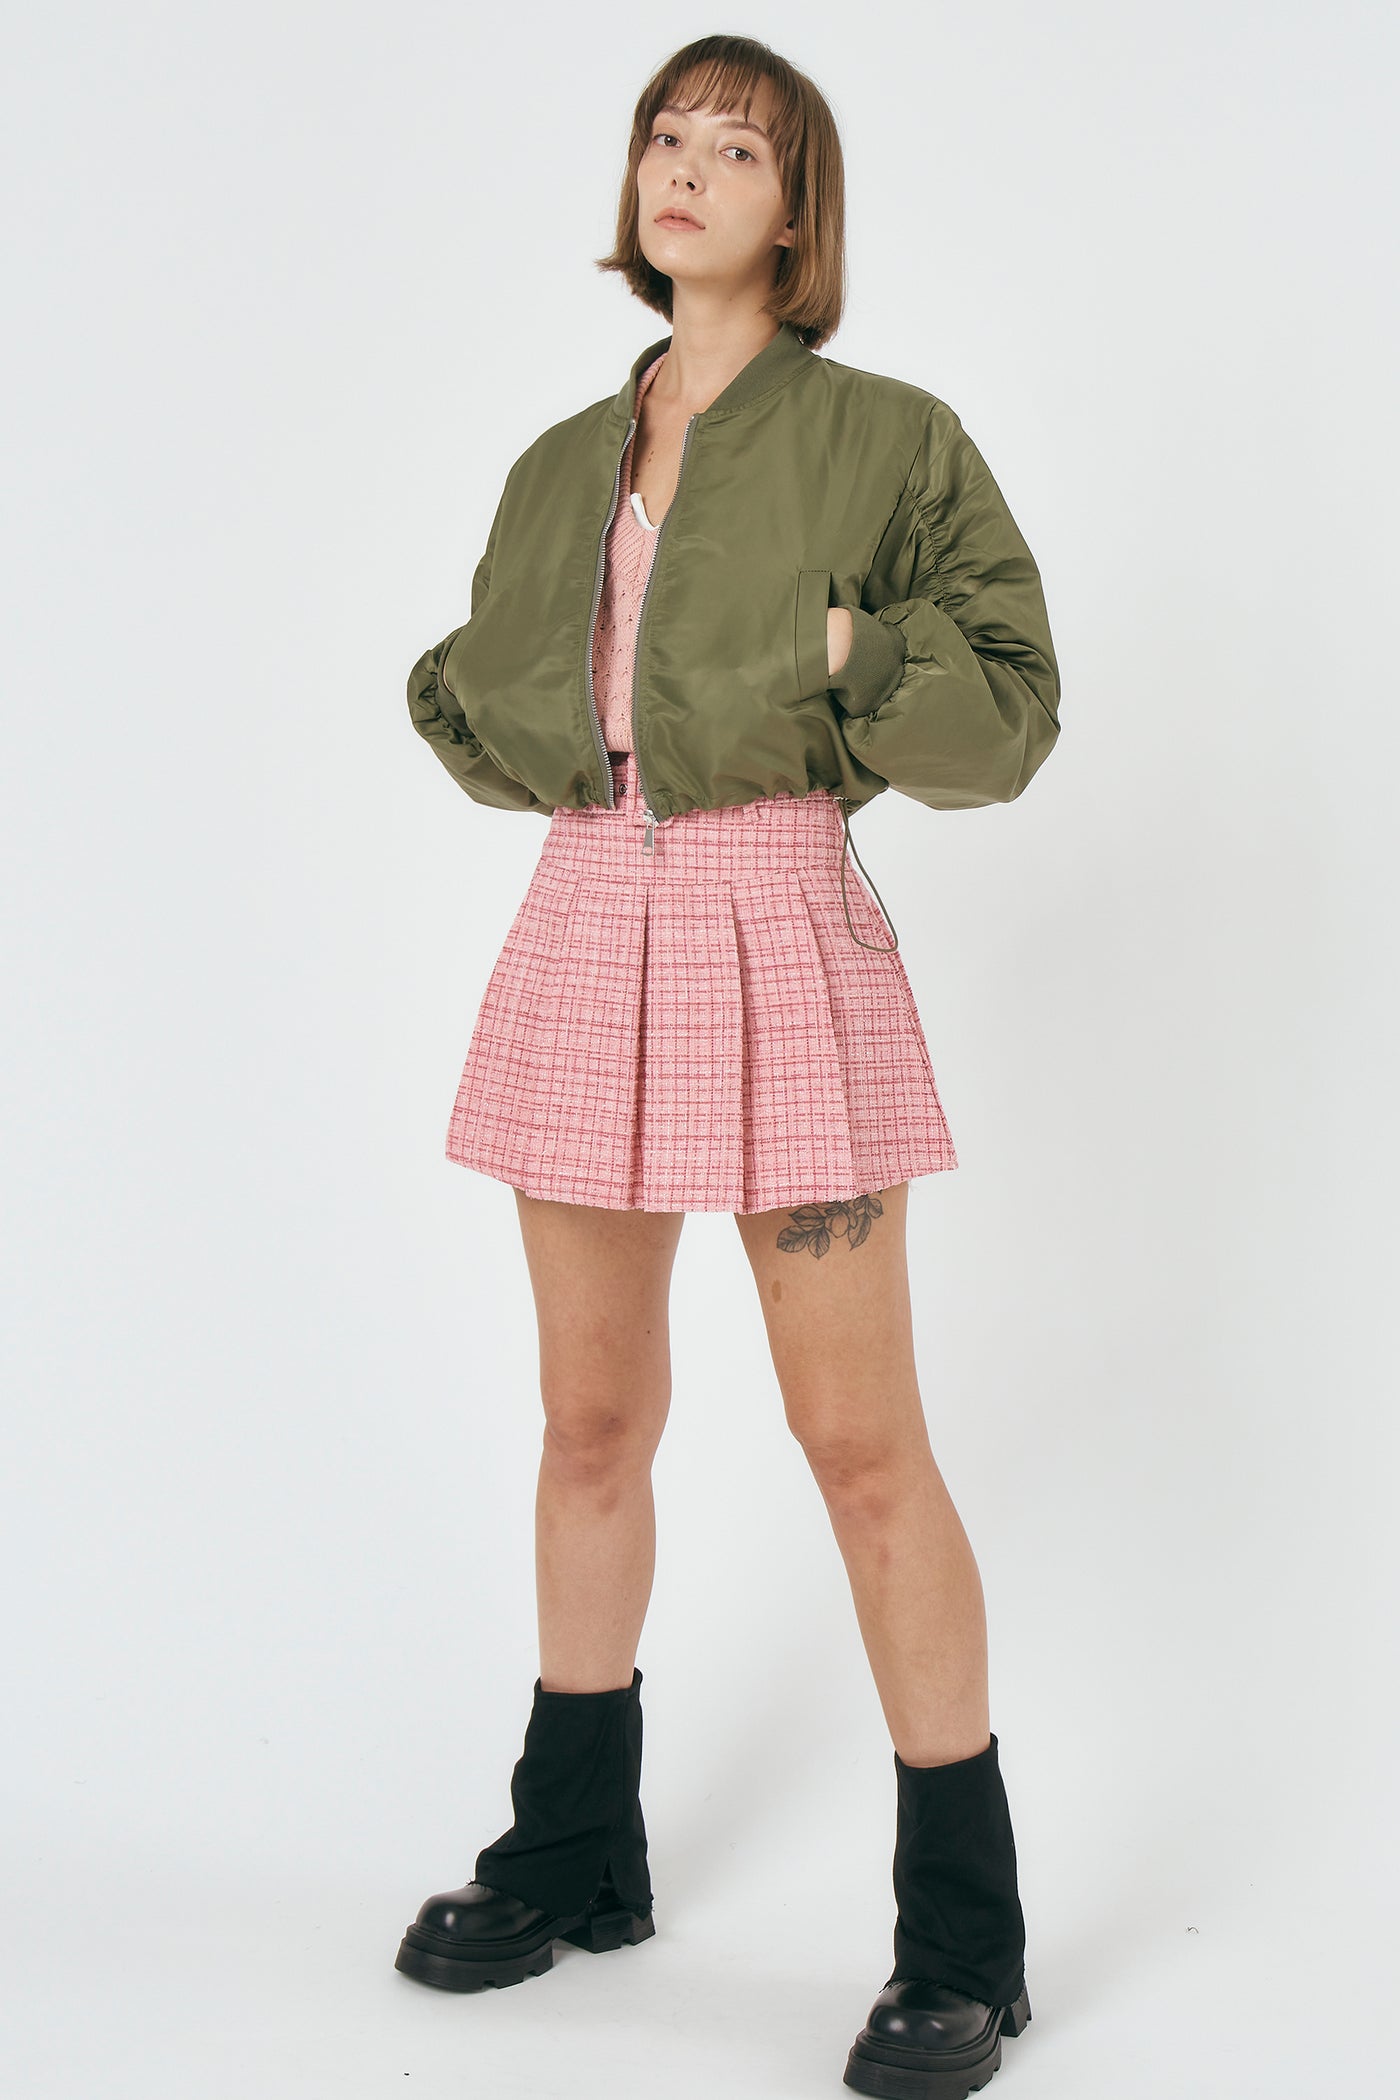 storets.com Claire Ruched Sleeve Jacket